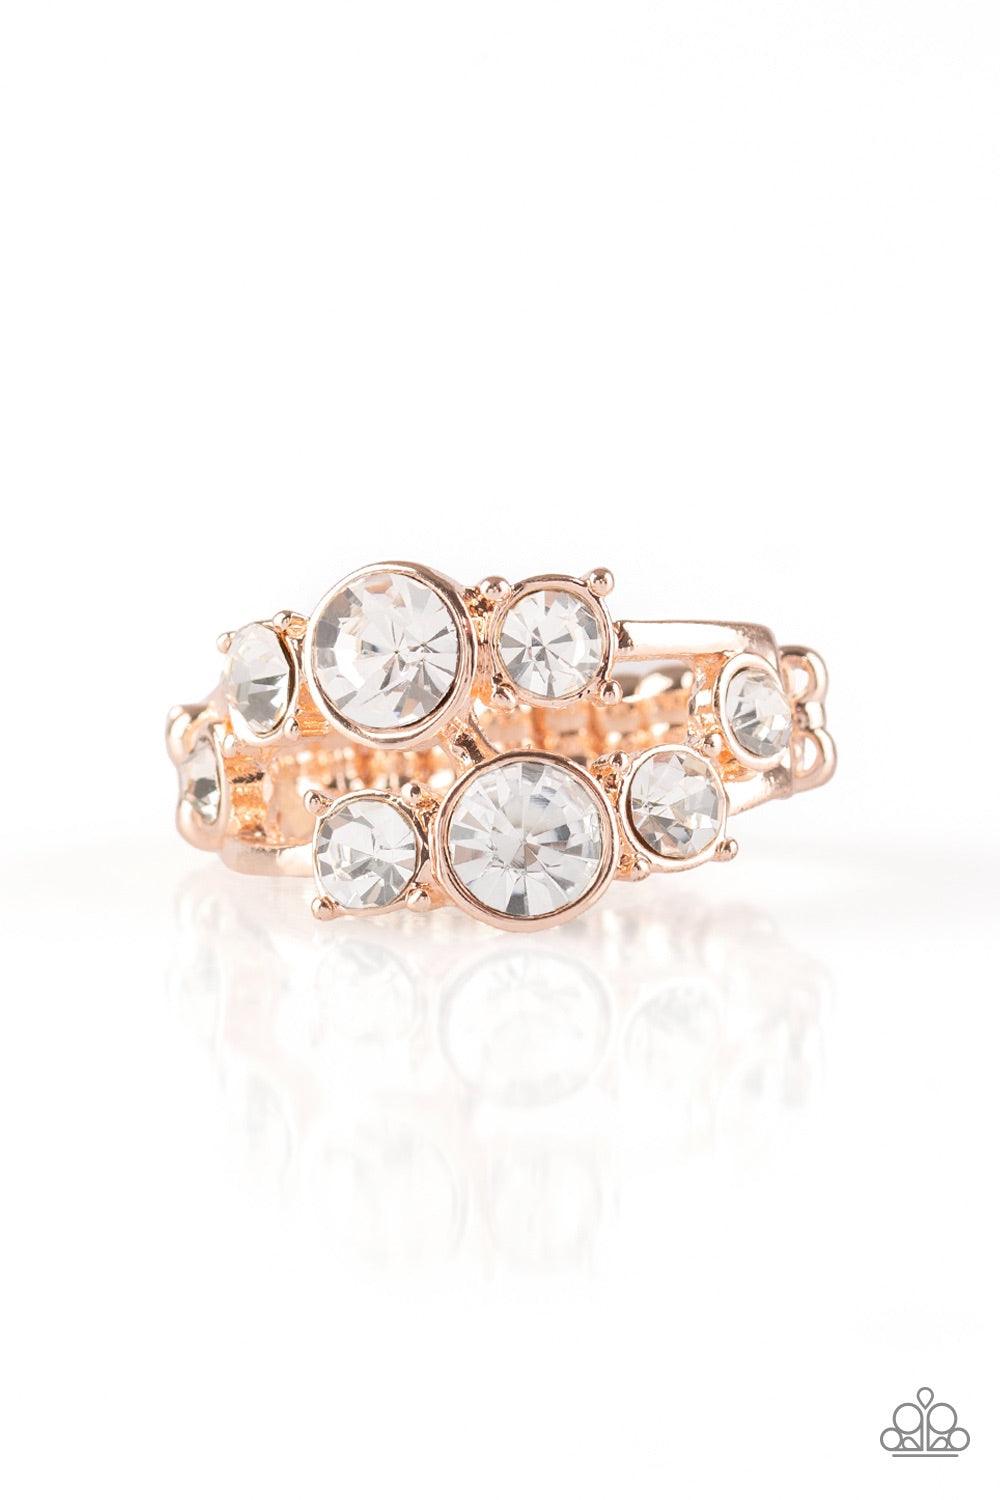 Paparazzi Accessories Interstellar Fashion - Rose Gold Rows of glittery white rhinestones connect across the finger, coalescing into a glamorous band. Features a dainty stretchy band for a flexible fit.